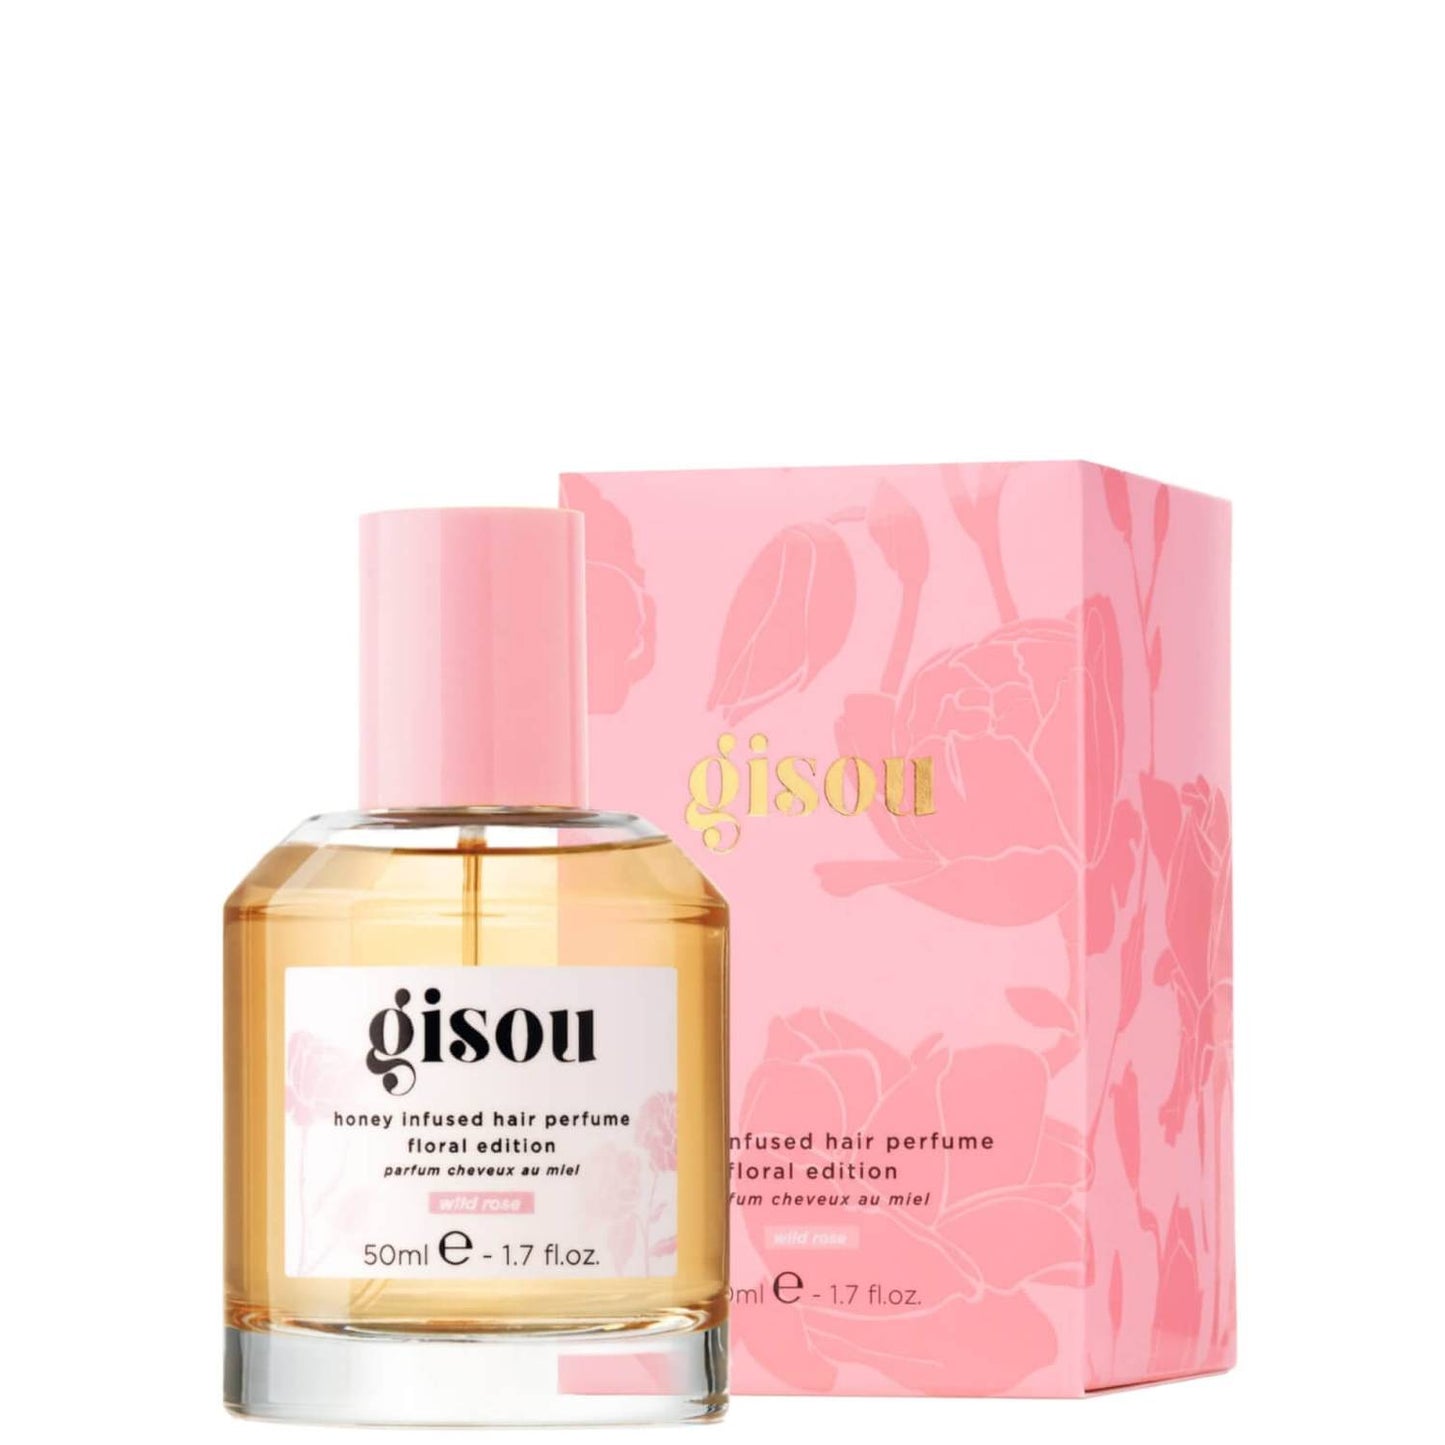 GISOU HONEY INFUSED HAIR PERFUME FLORAL EDITION 50ML - WILD ROSE